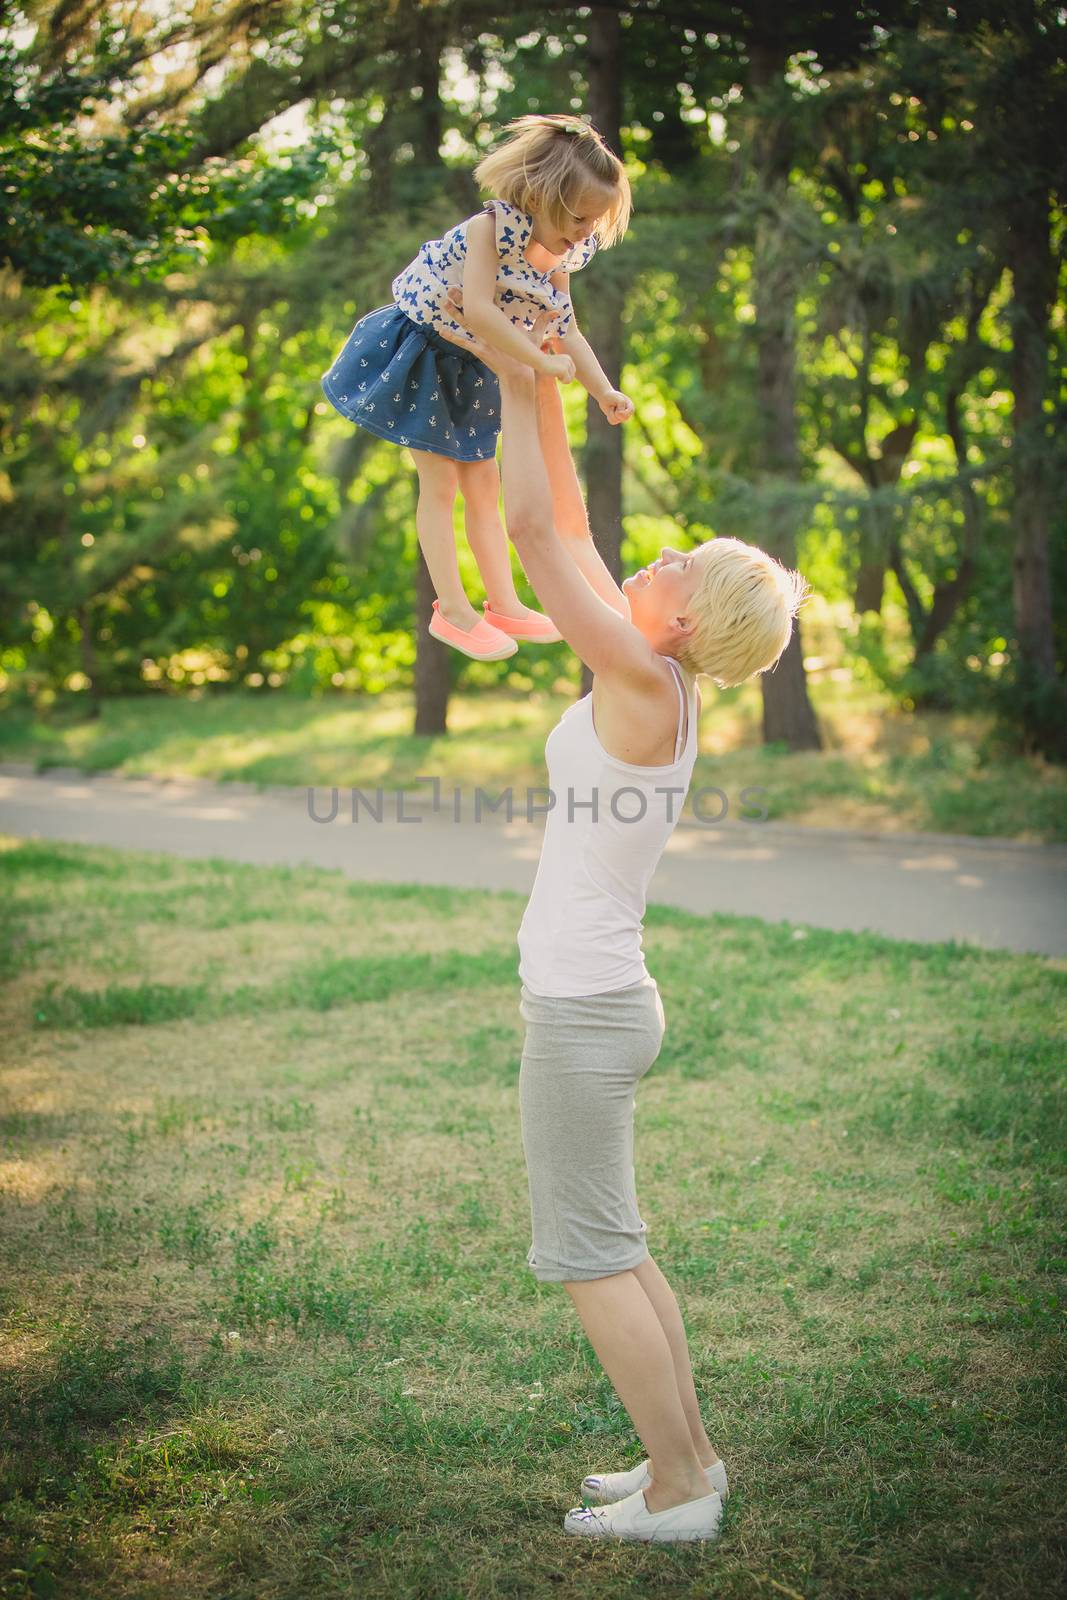 Mom playing with daughter in the park. Concept of a happy family